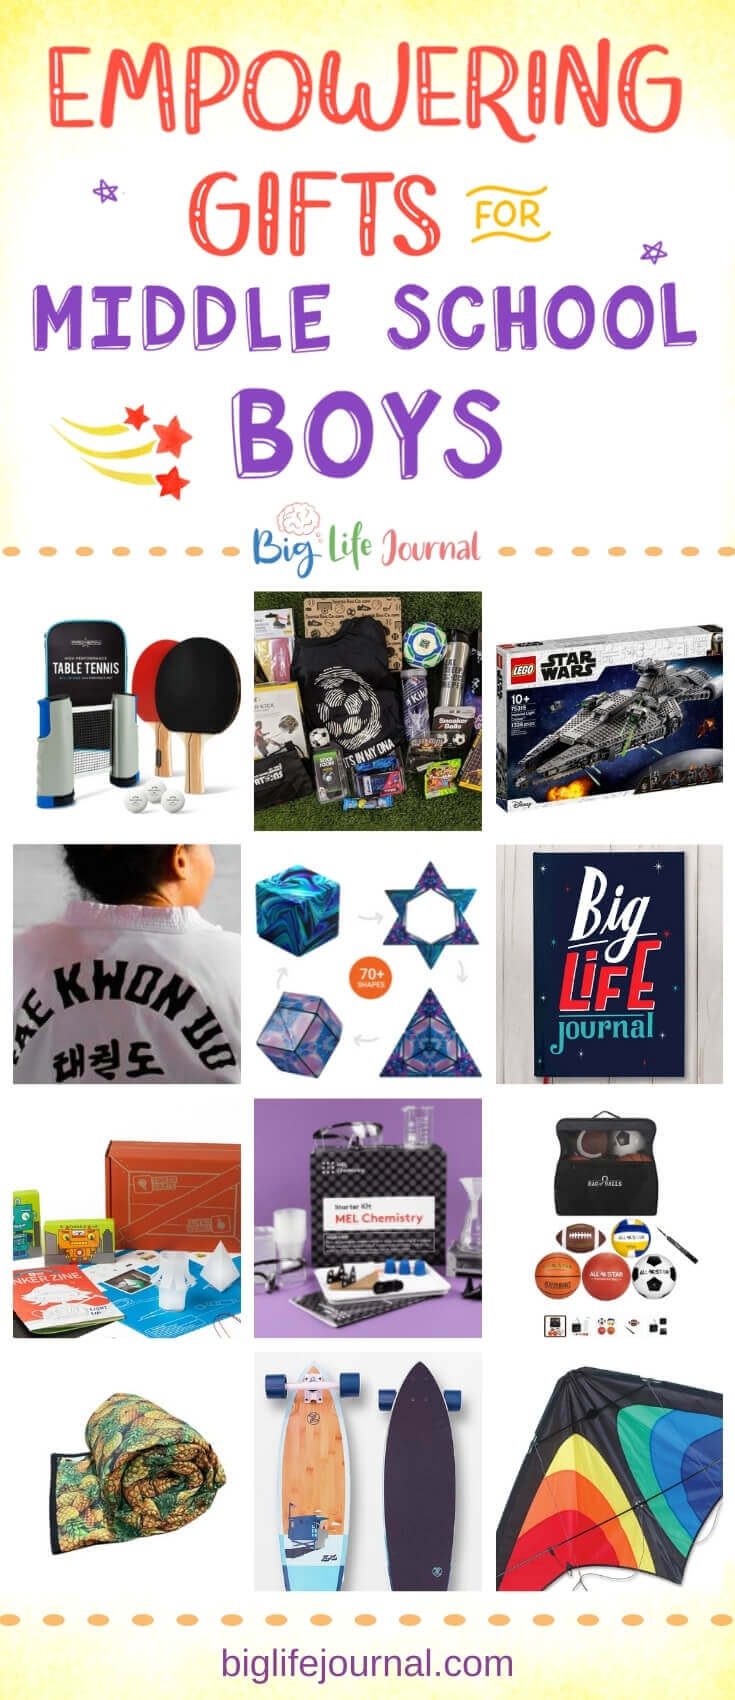 Empowering gifts for middle school boys big life journal. biglifejournal.com